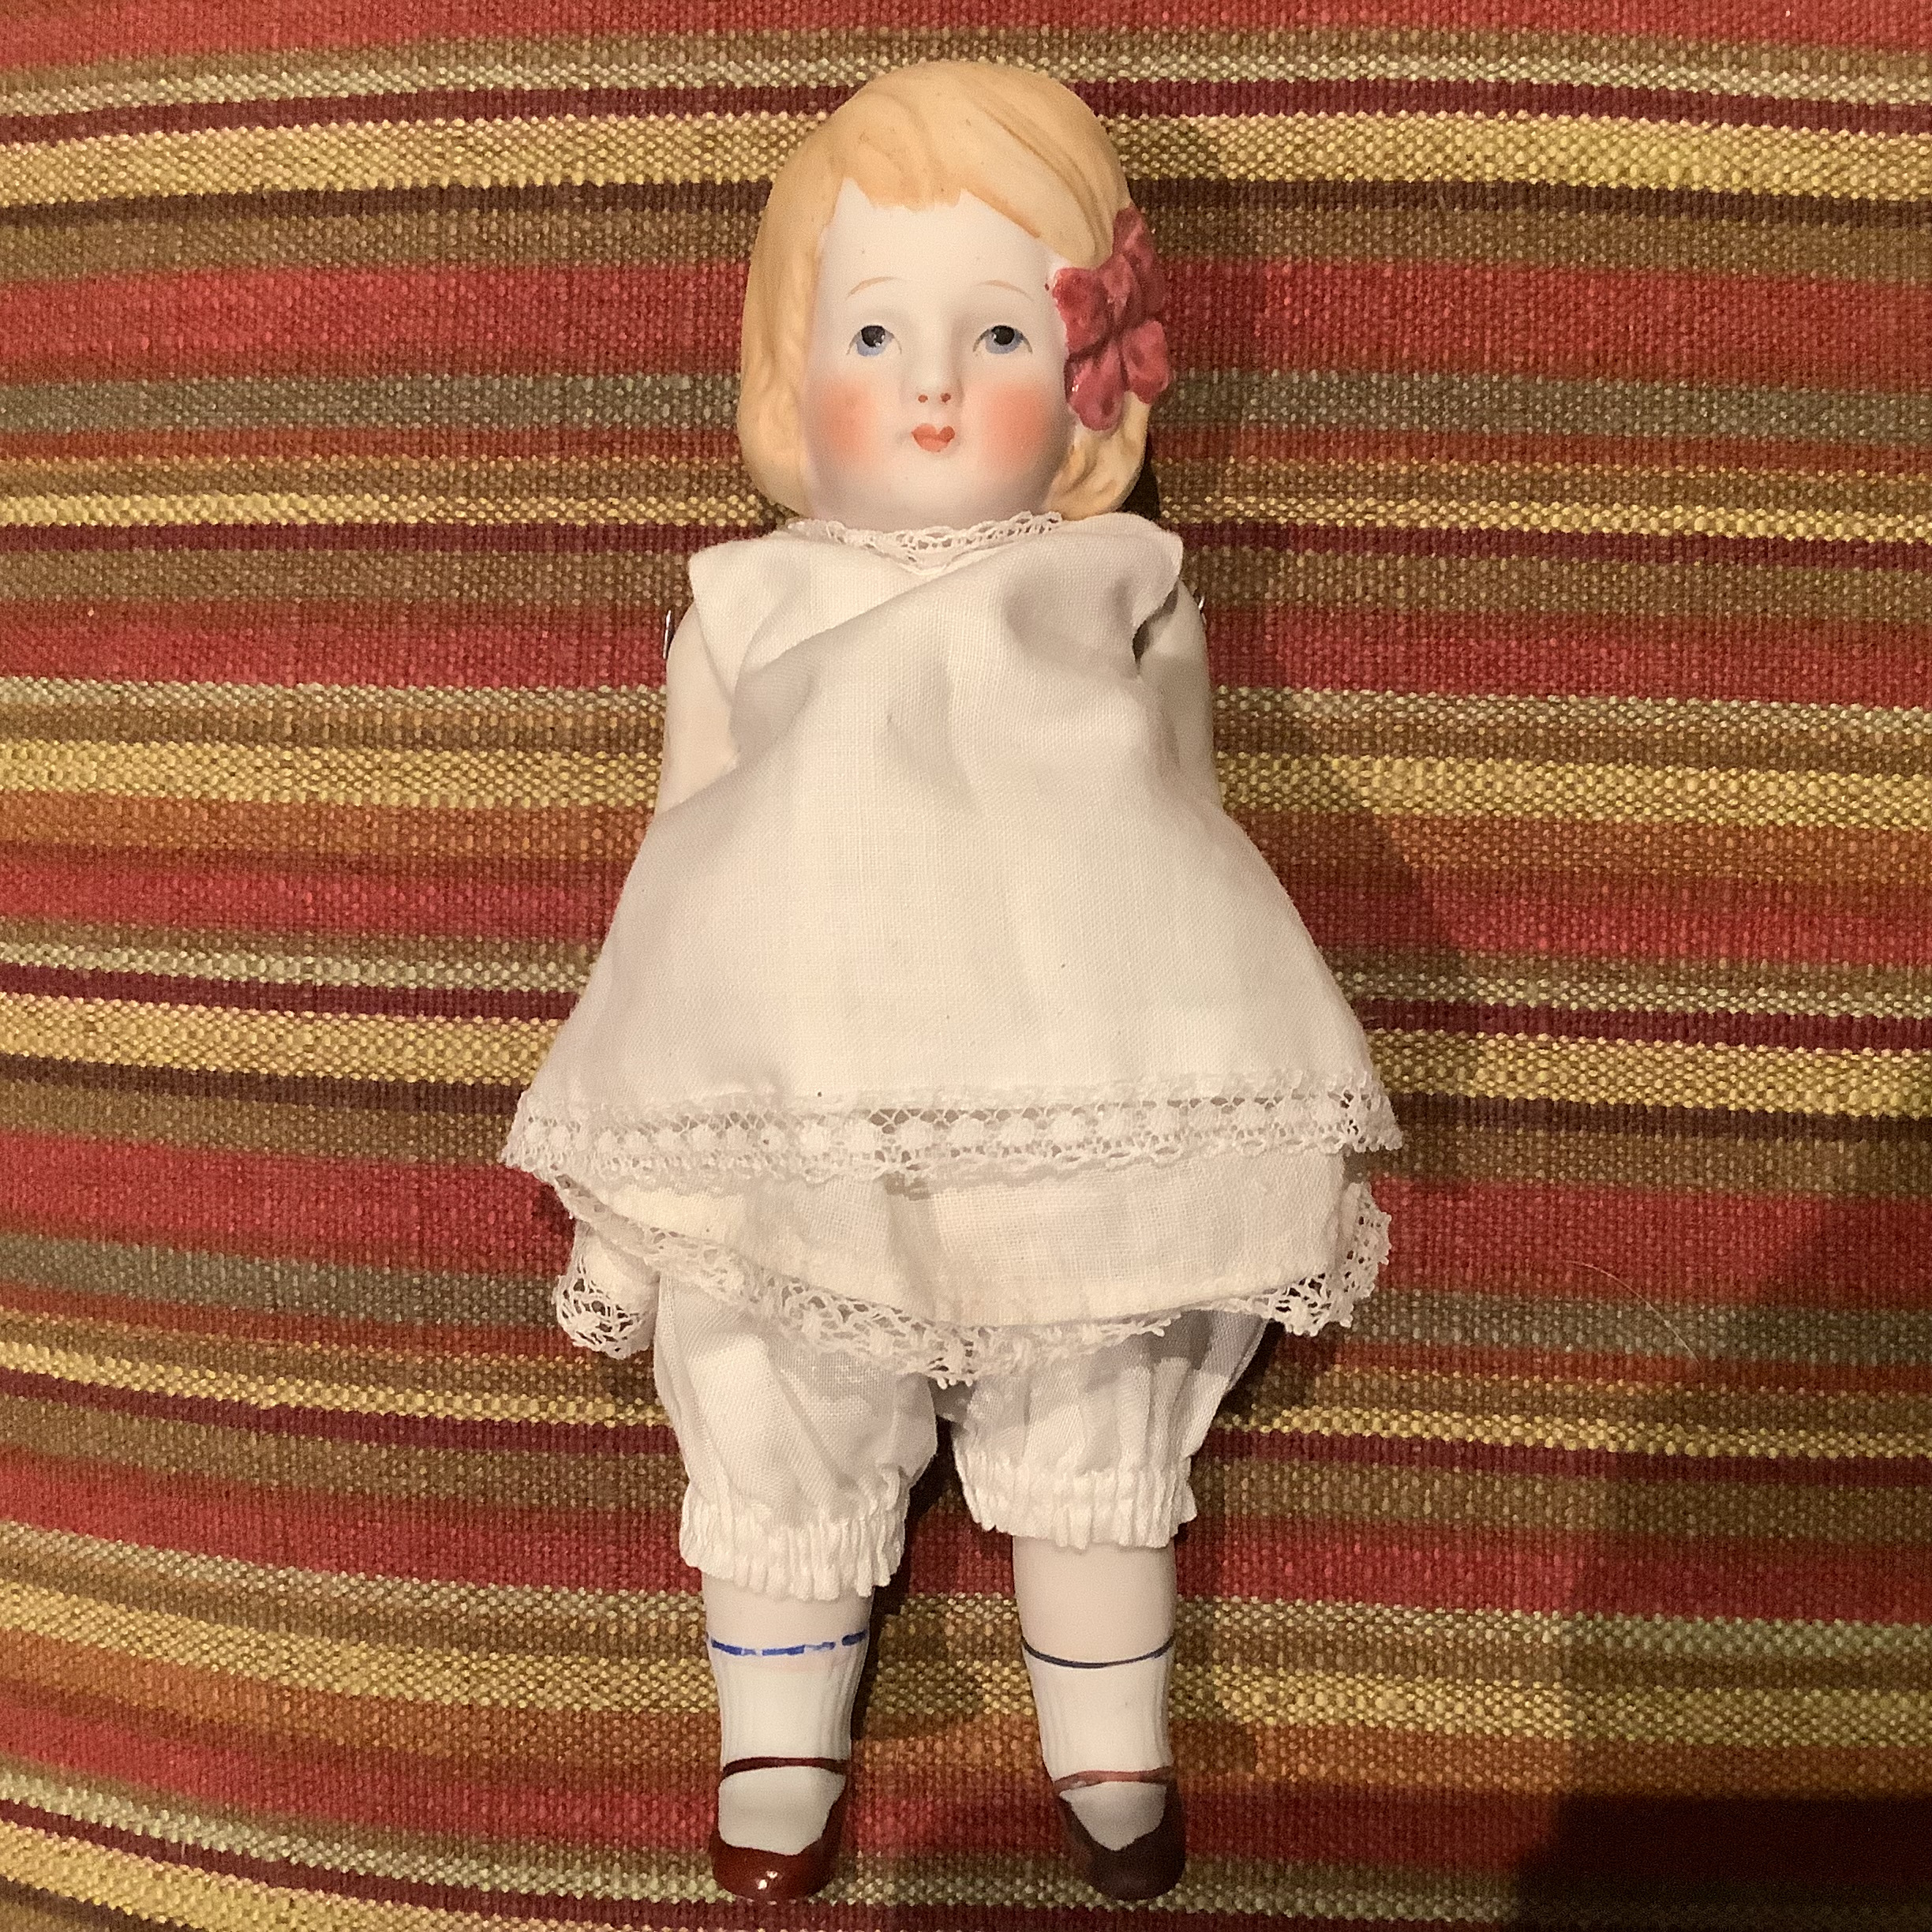 Small vintage girl doll with jointed shoulders and hips